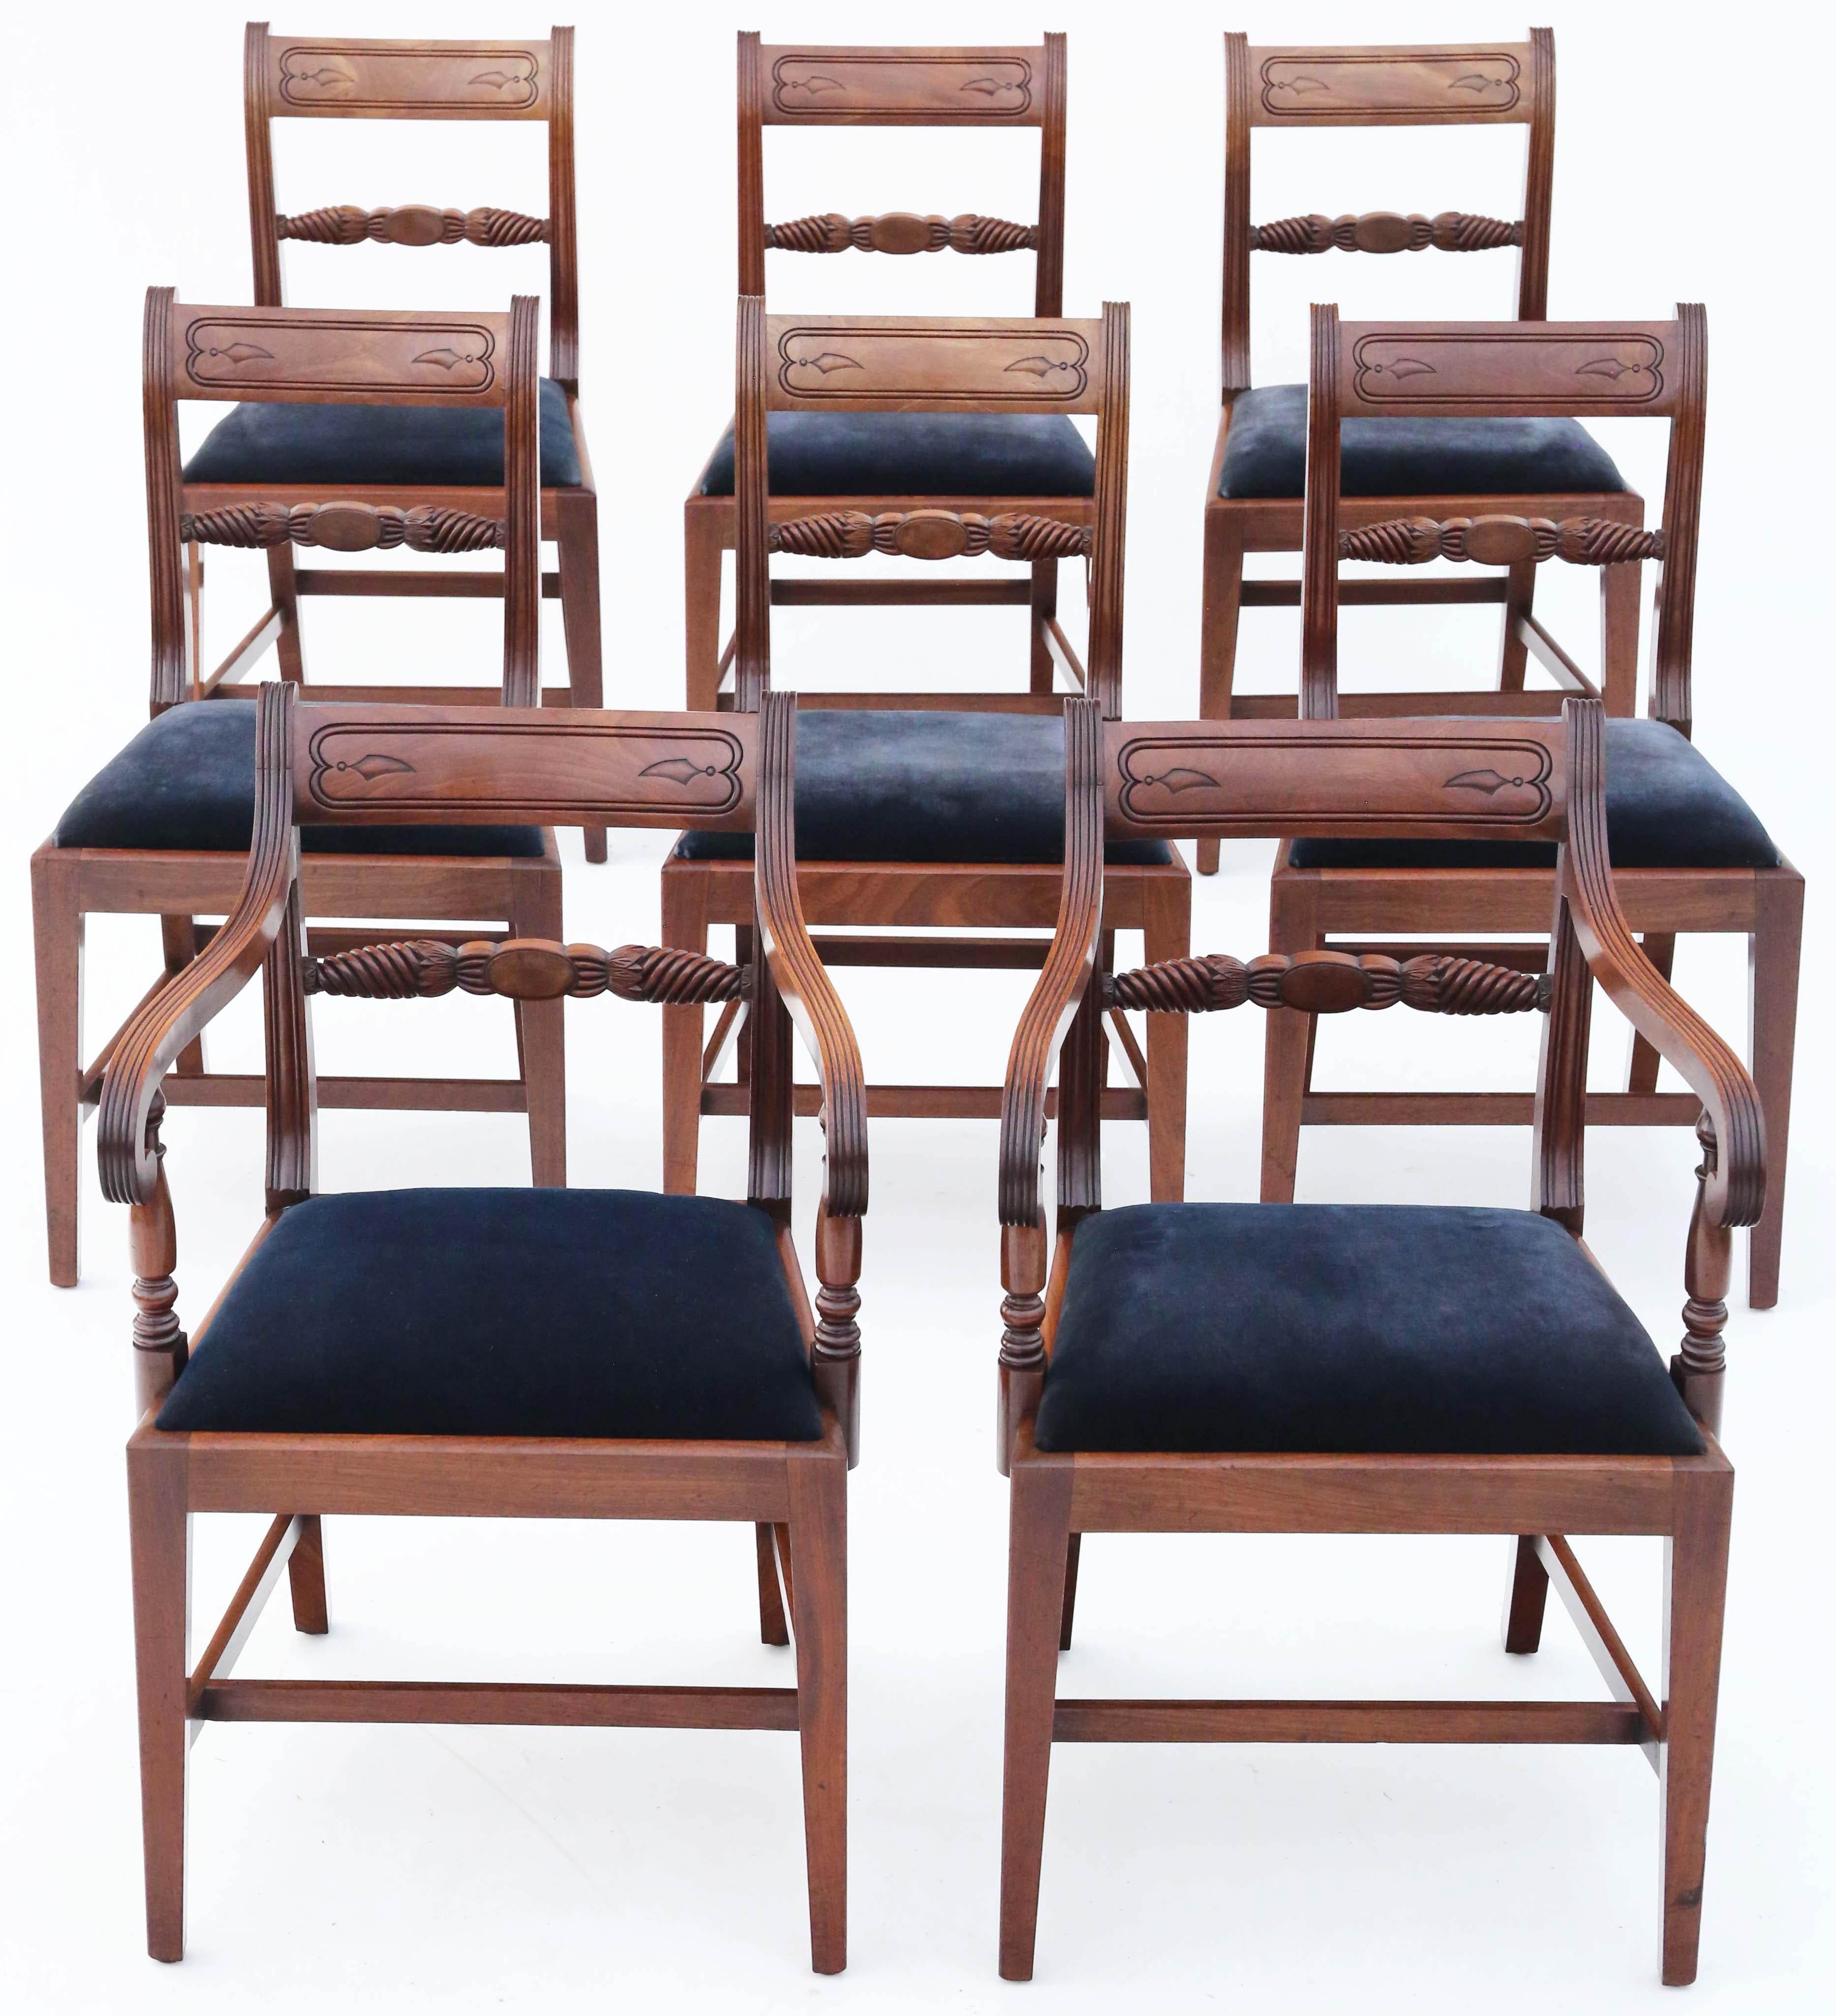 Antique fine quality set of 8 (6 plus 2) early 19th Century Regency mahogany dining chairs C1830. Very rare, with a simple elegant design!

No loose joints. Recently restored to a good standard.

The midnight blue (looks almost black) velour